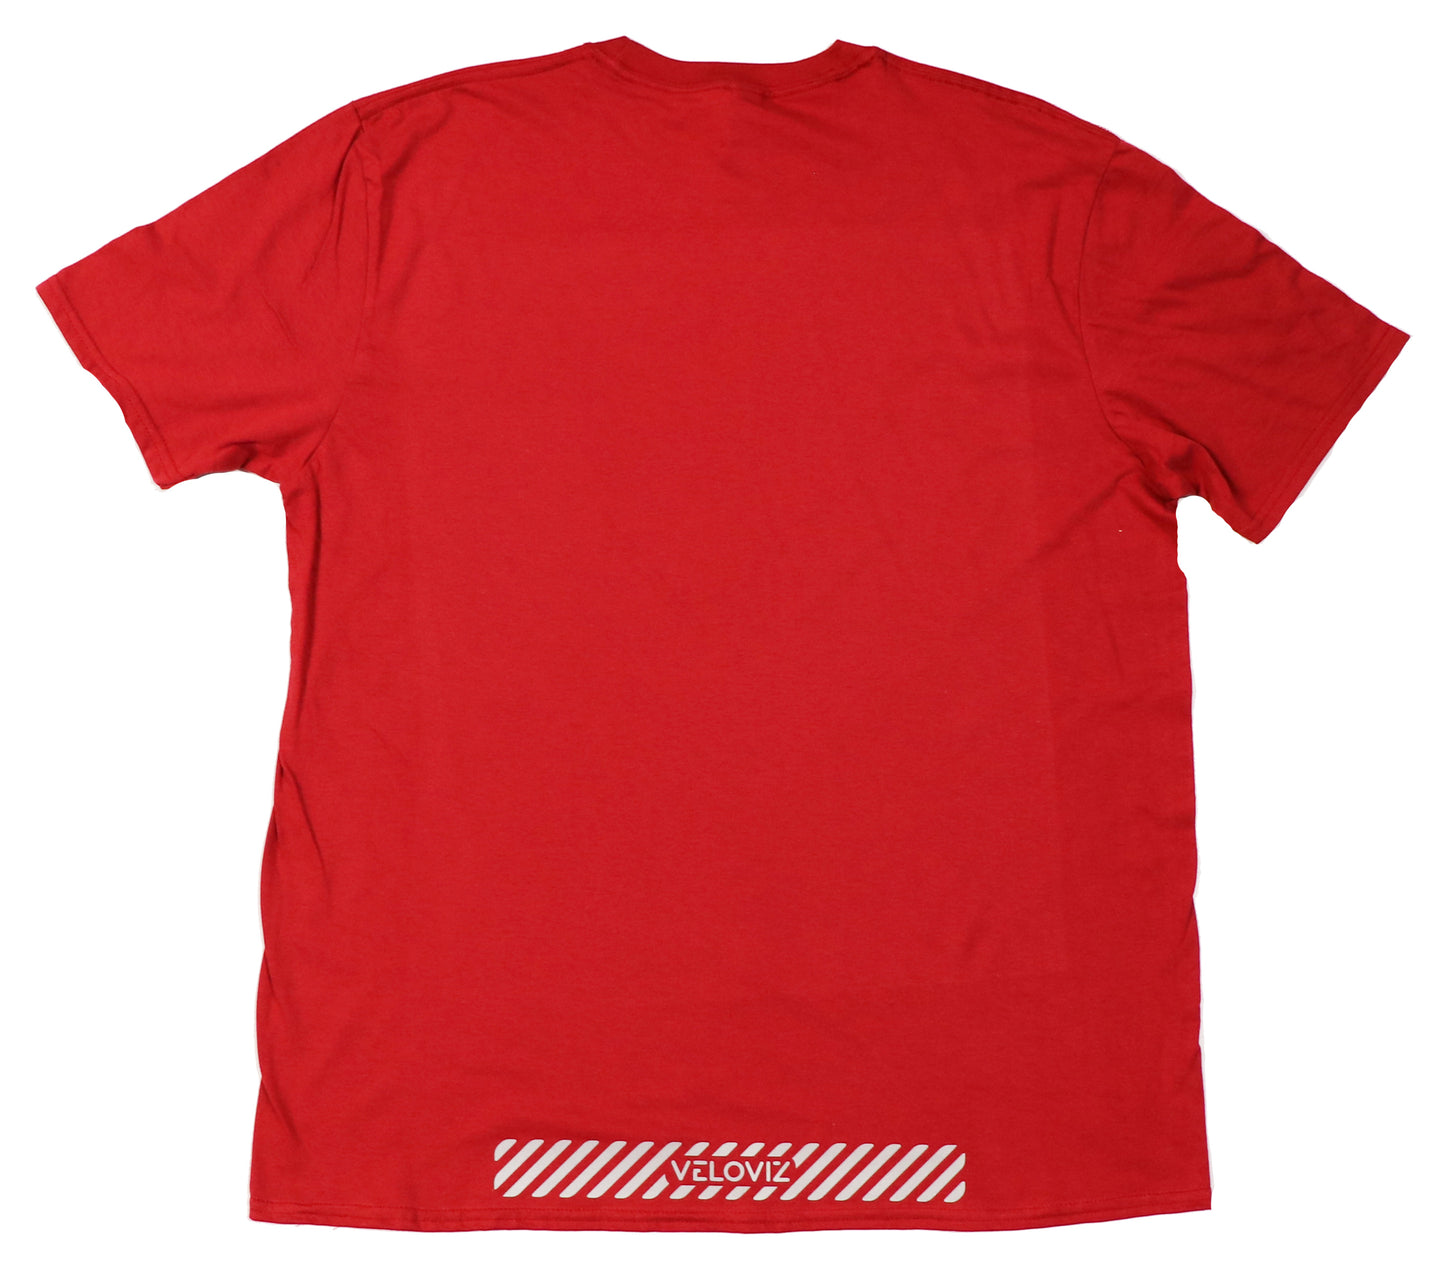 Reflective T Shirts - Reflective Goods Co - Red (Mens)